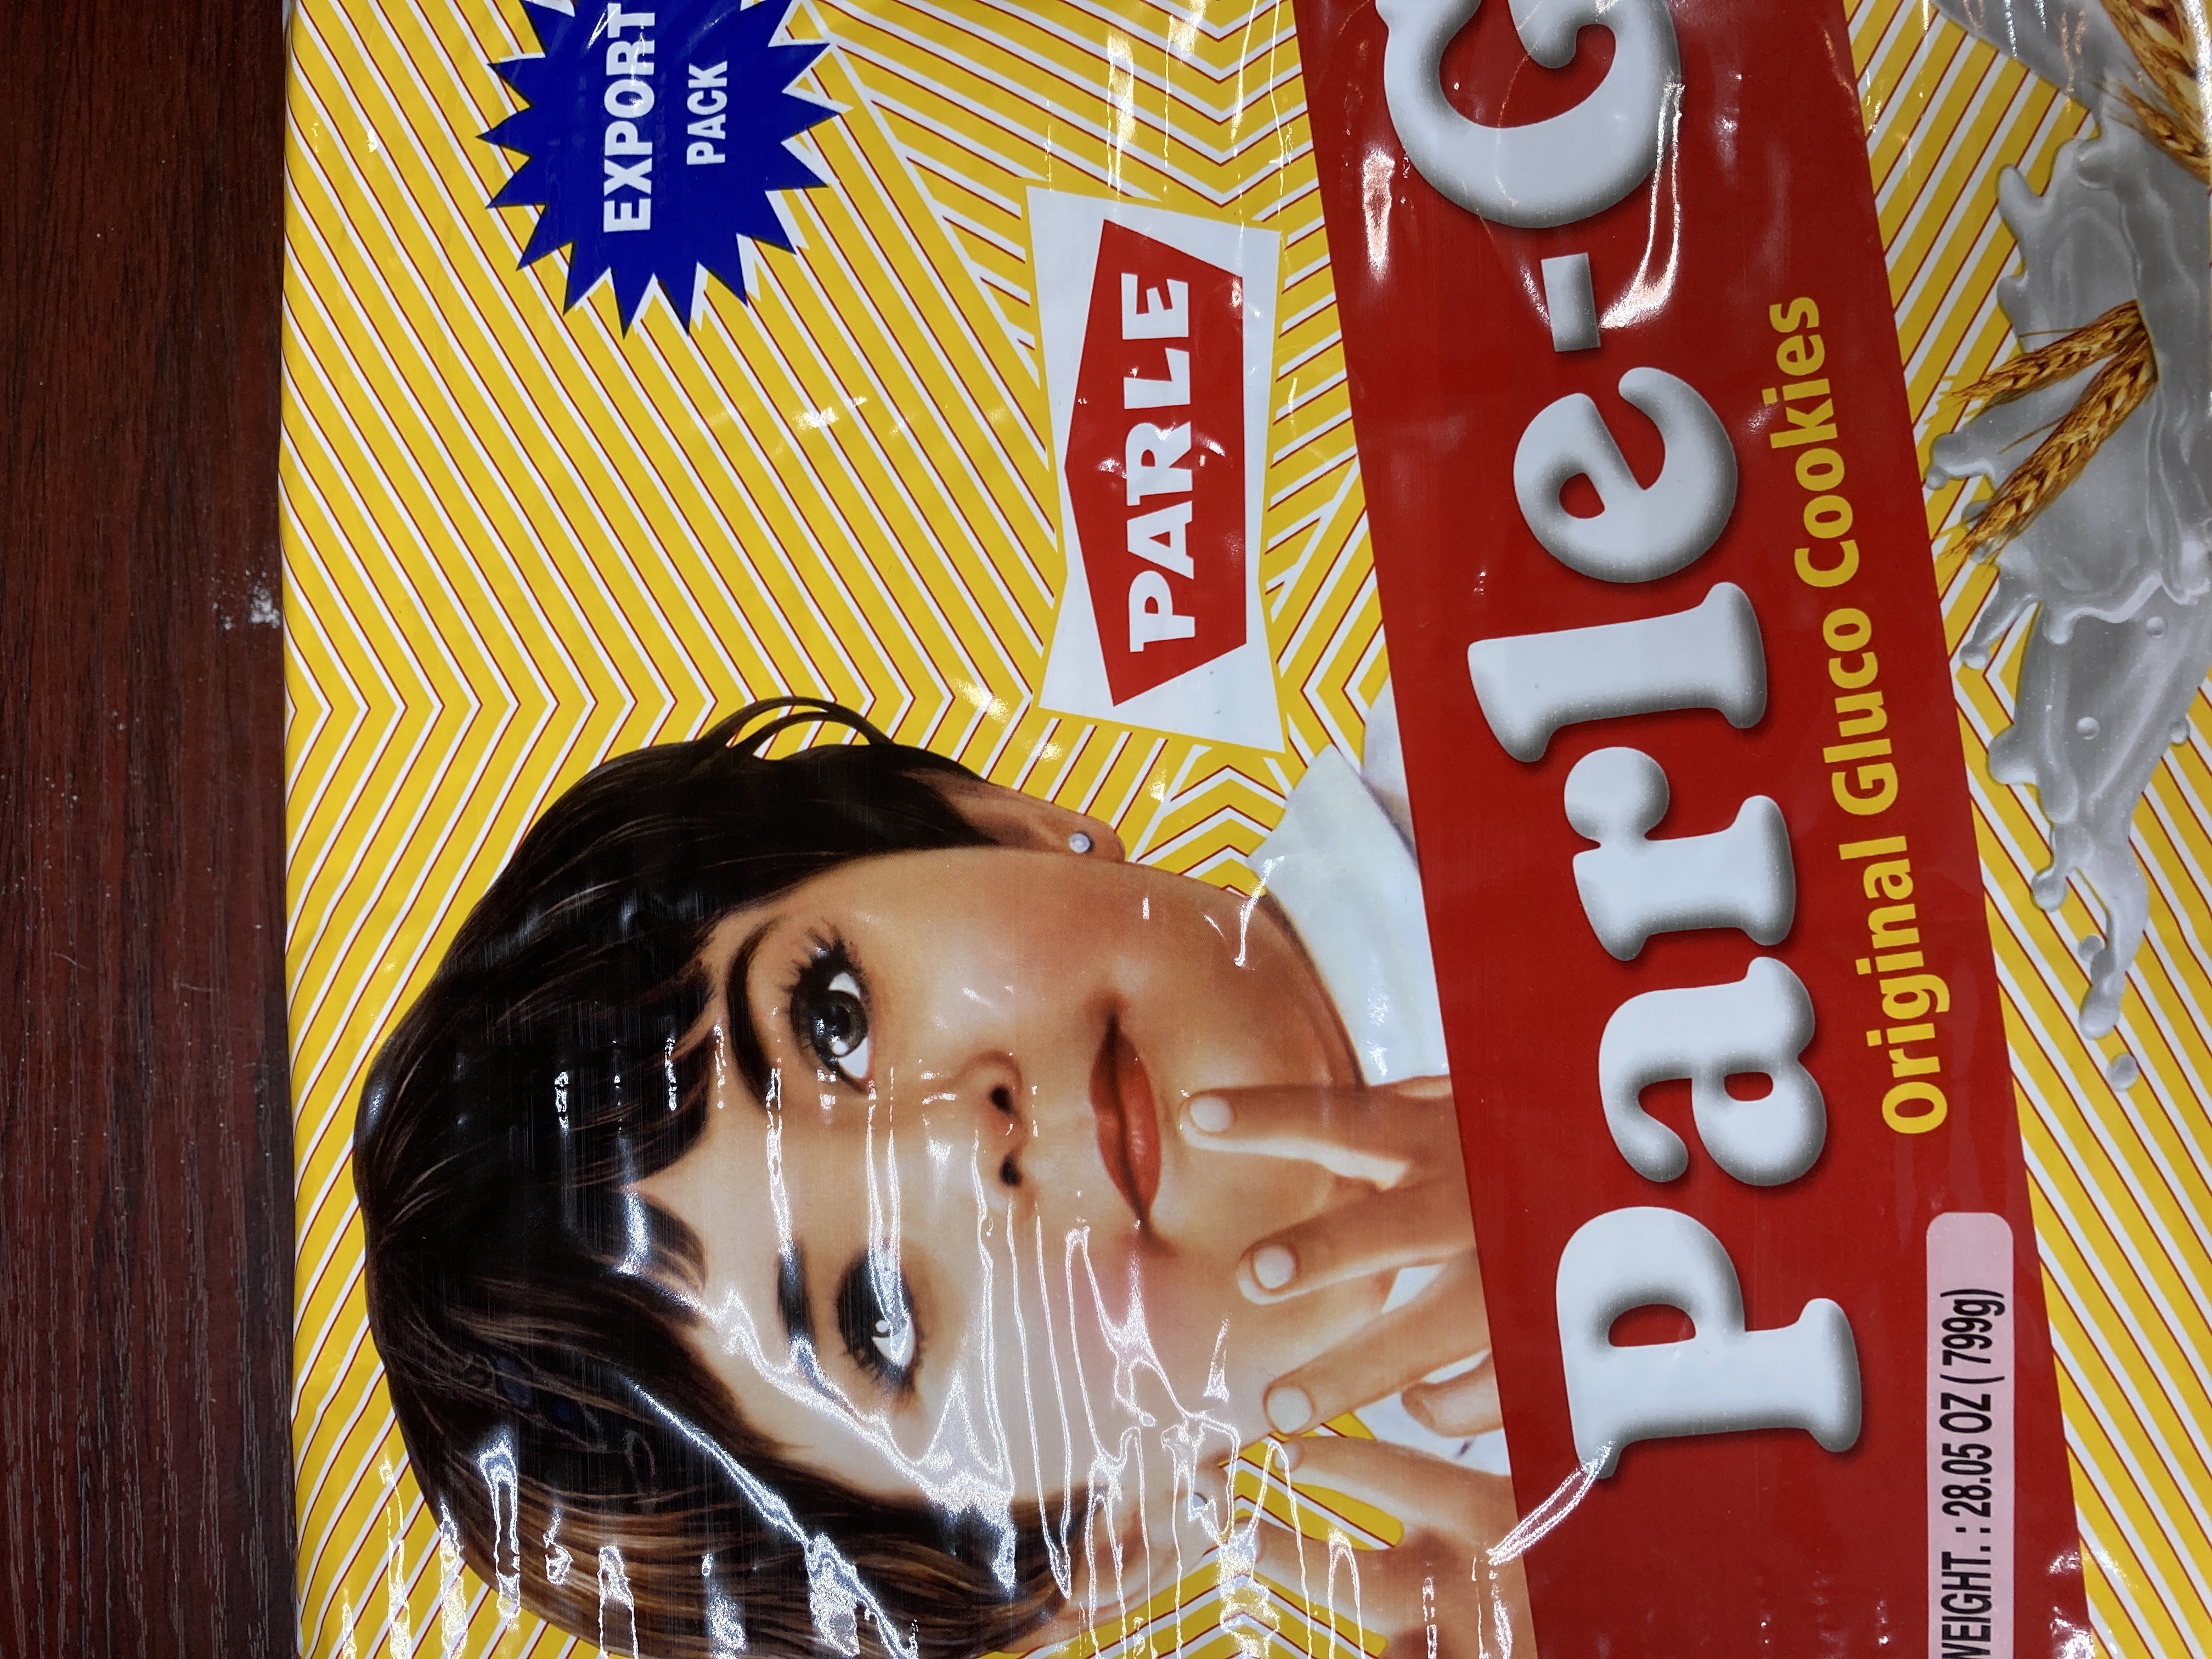 Parle G Biscuits